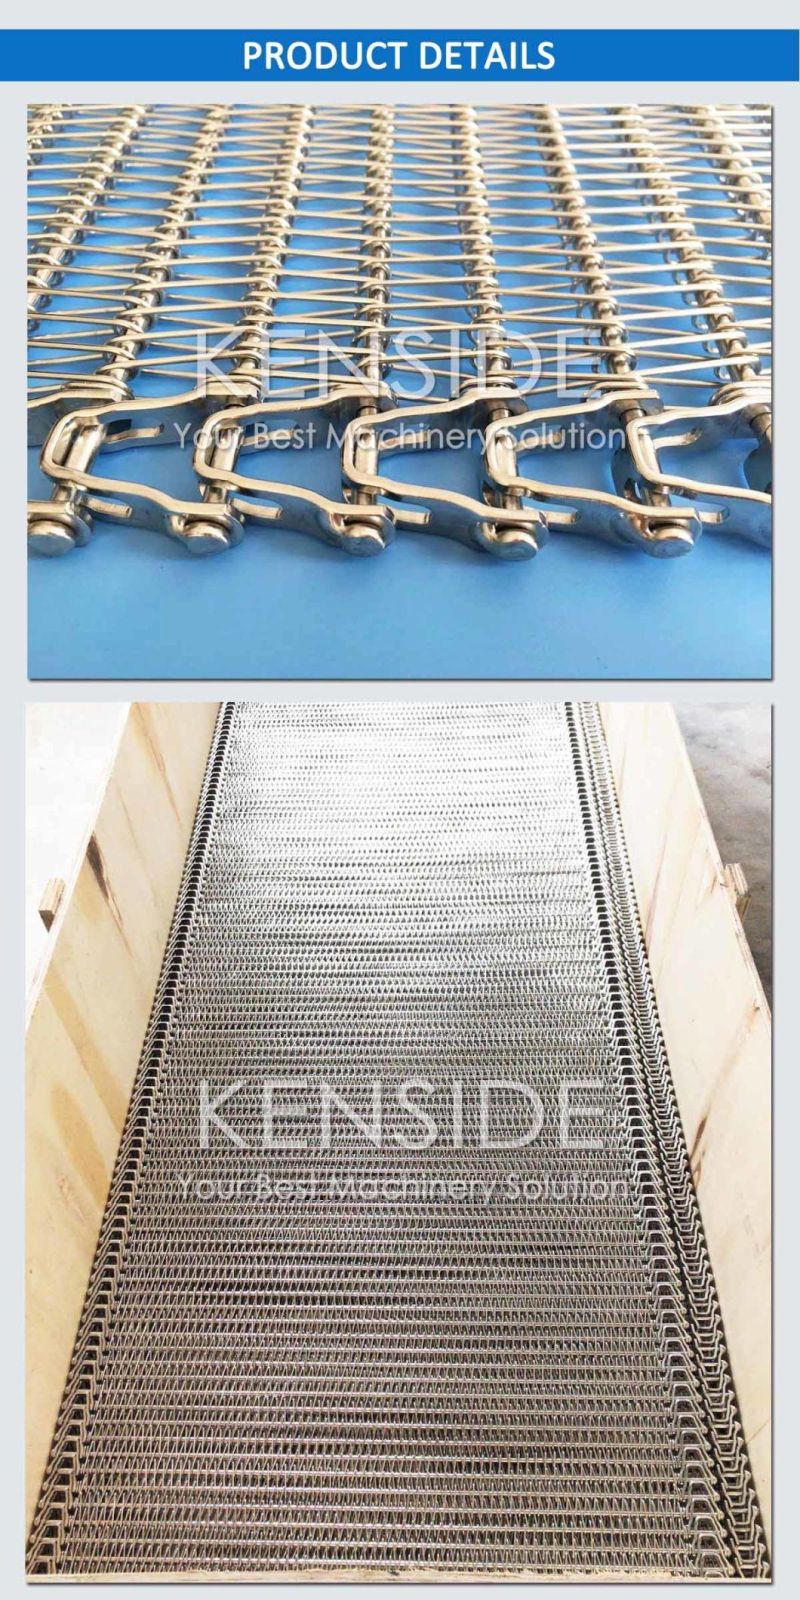 Stainless Steel Belting Spiral Conveyor Belts Reduced Radius Belts for Cooling, Freezing, Proofing Spiral Applications